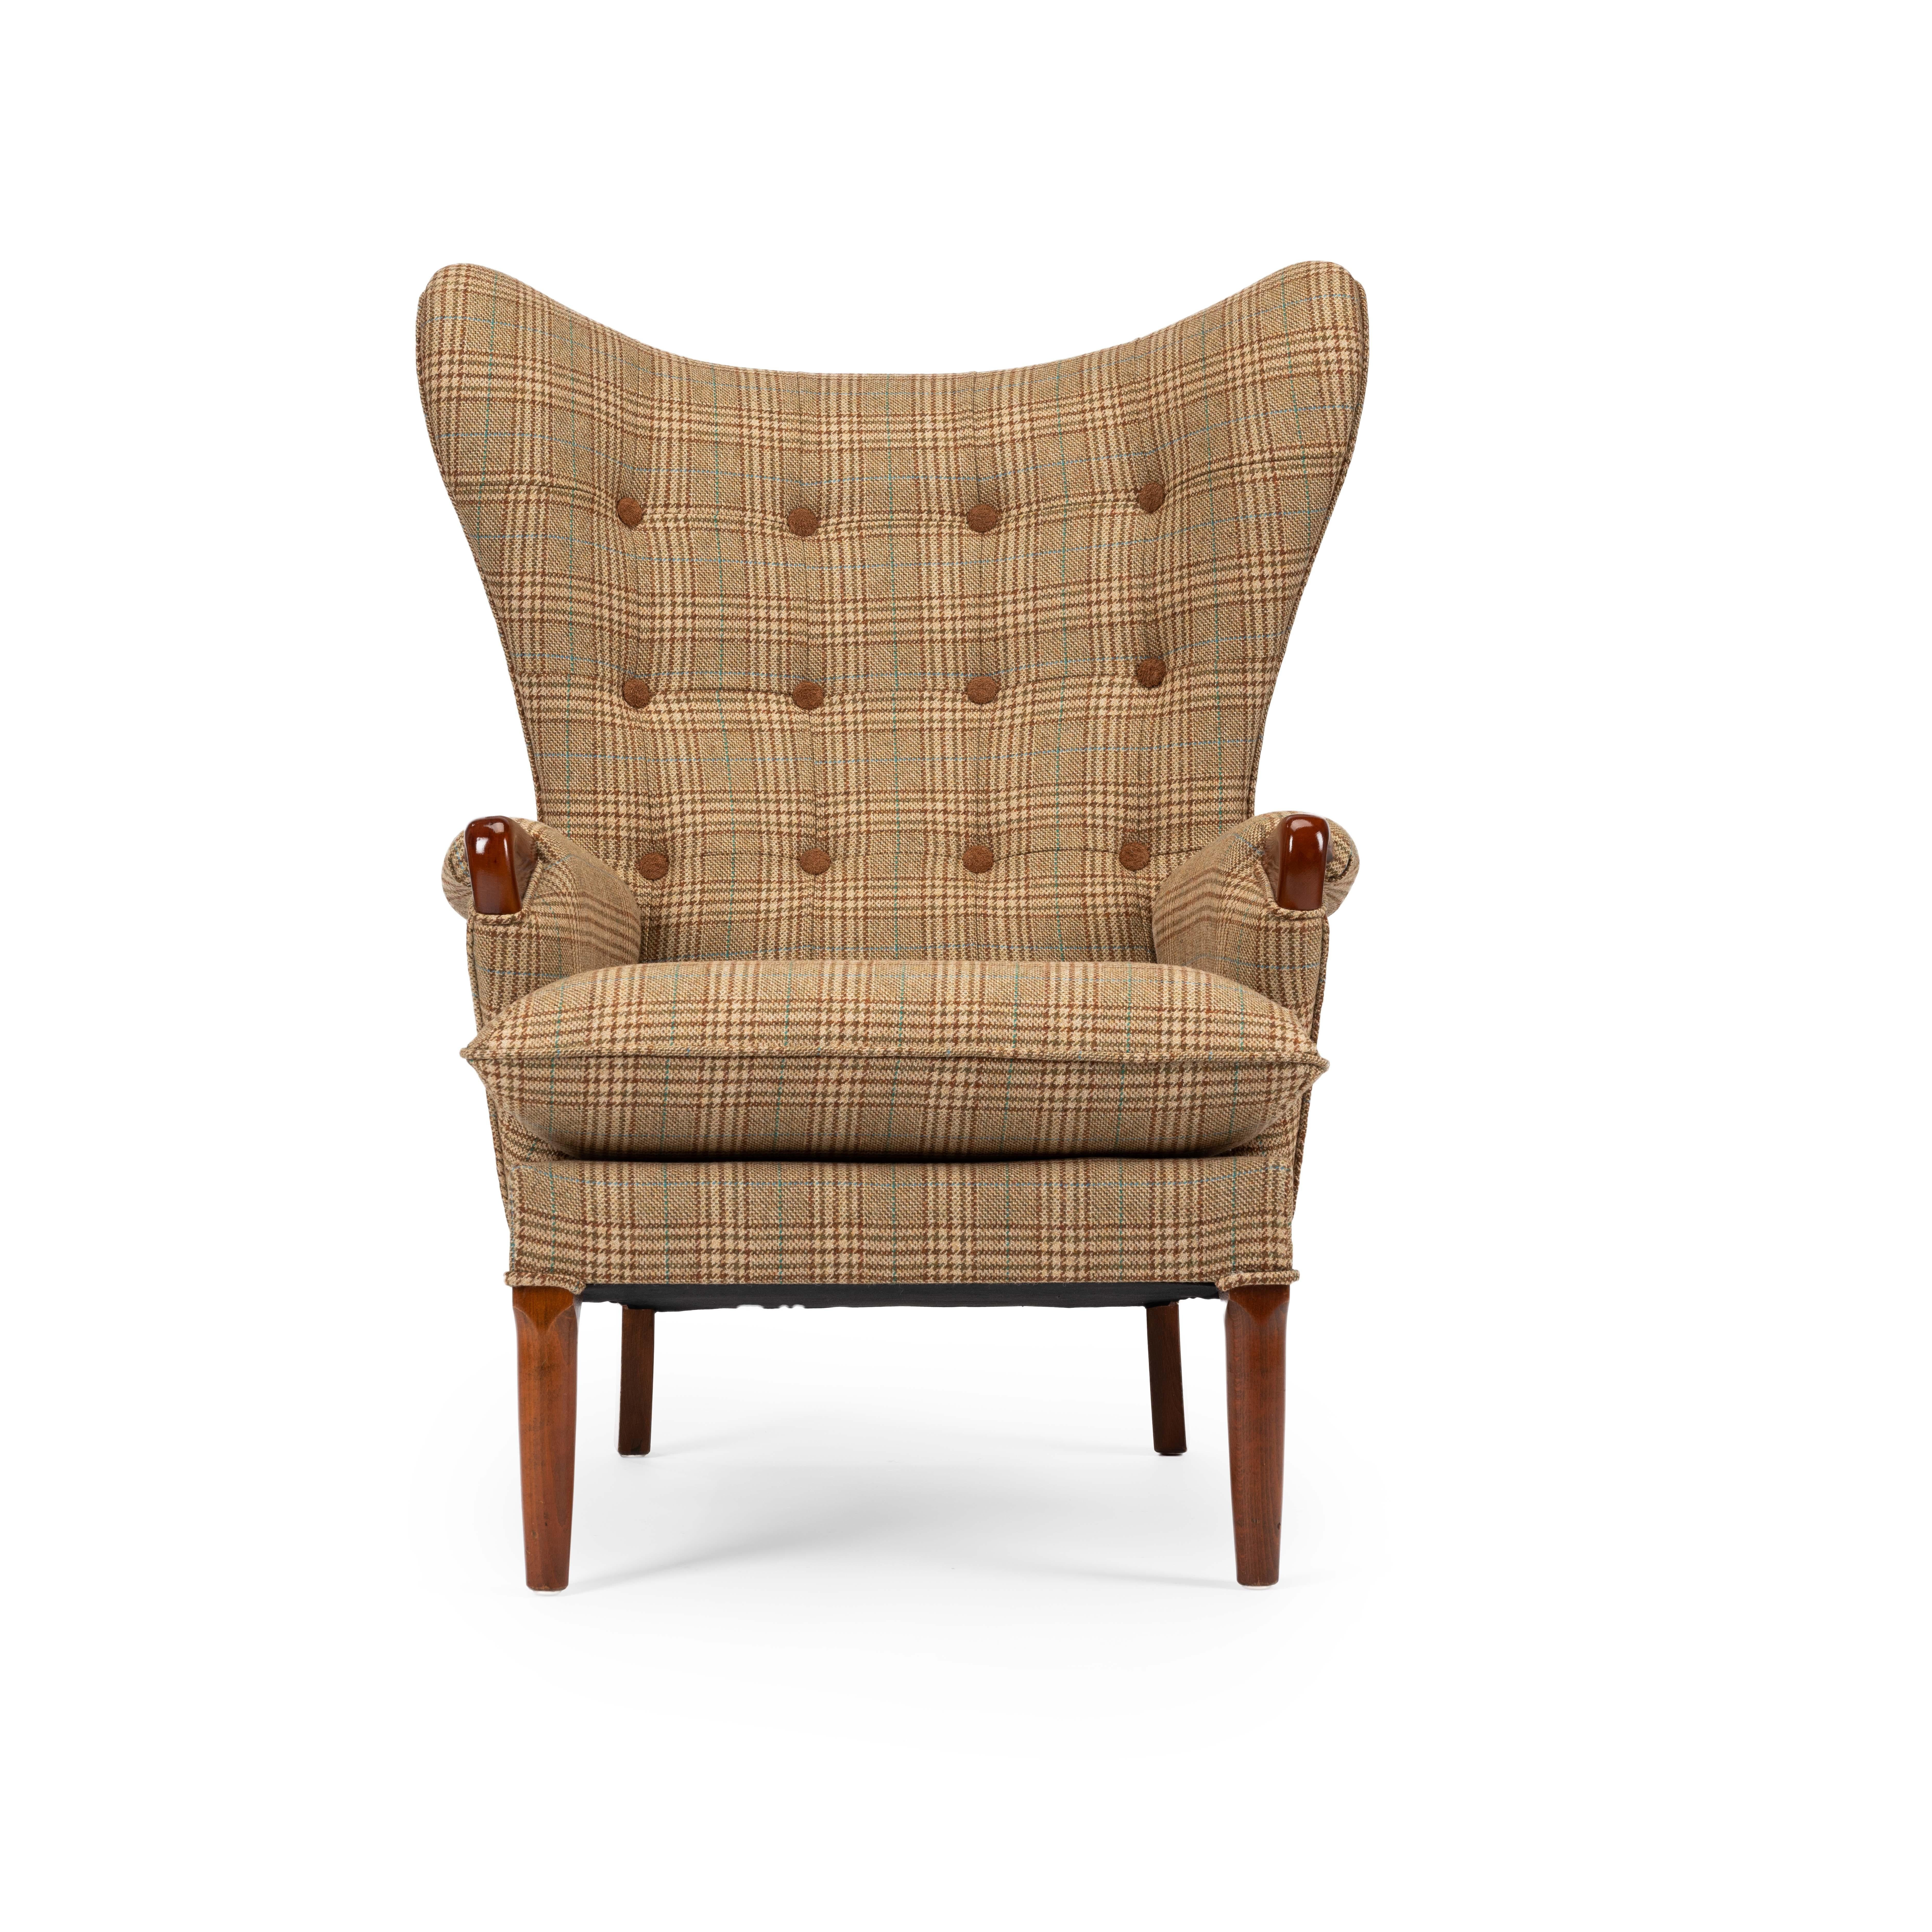 Midcentury Vintage Wingback Chairs Reupholstered in Yorkshire Tweed, circa 1960s (Mahagoni)